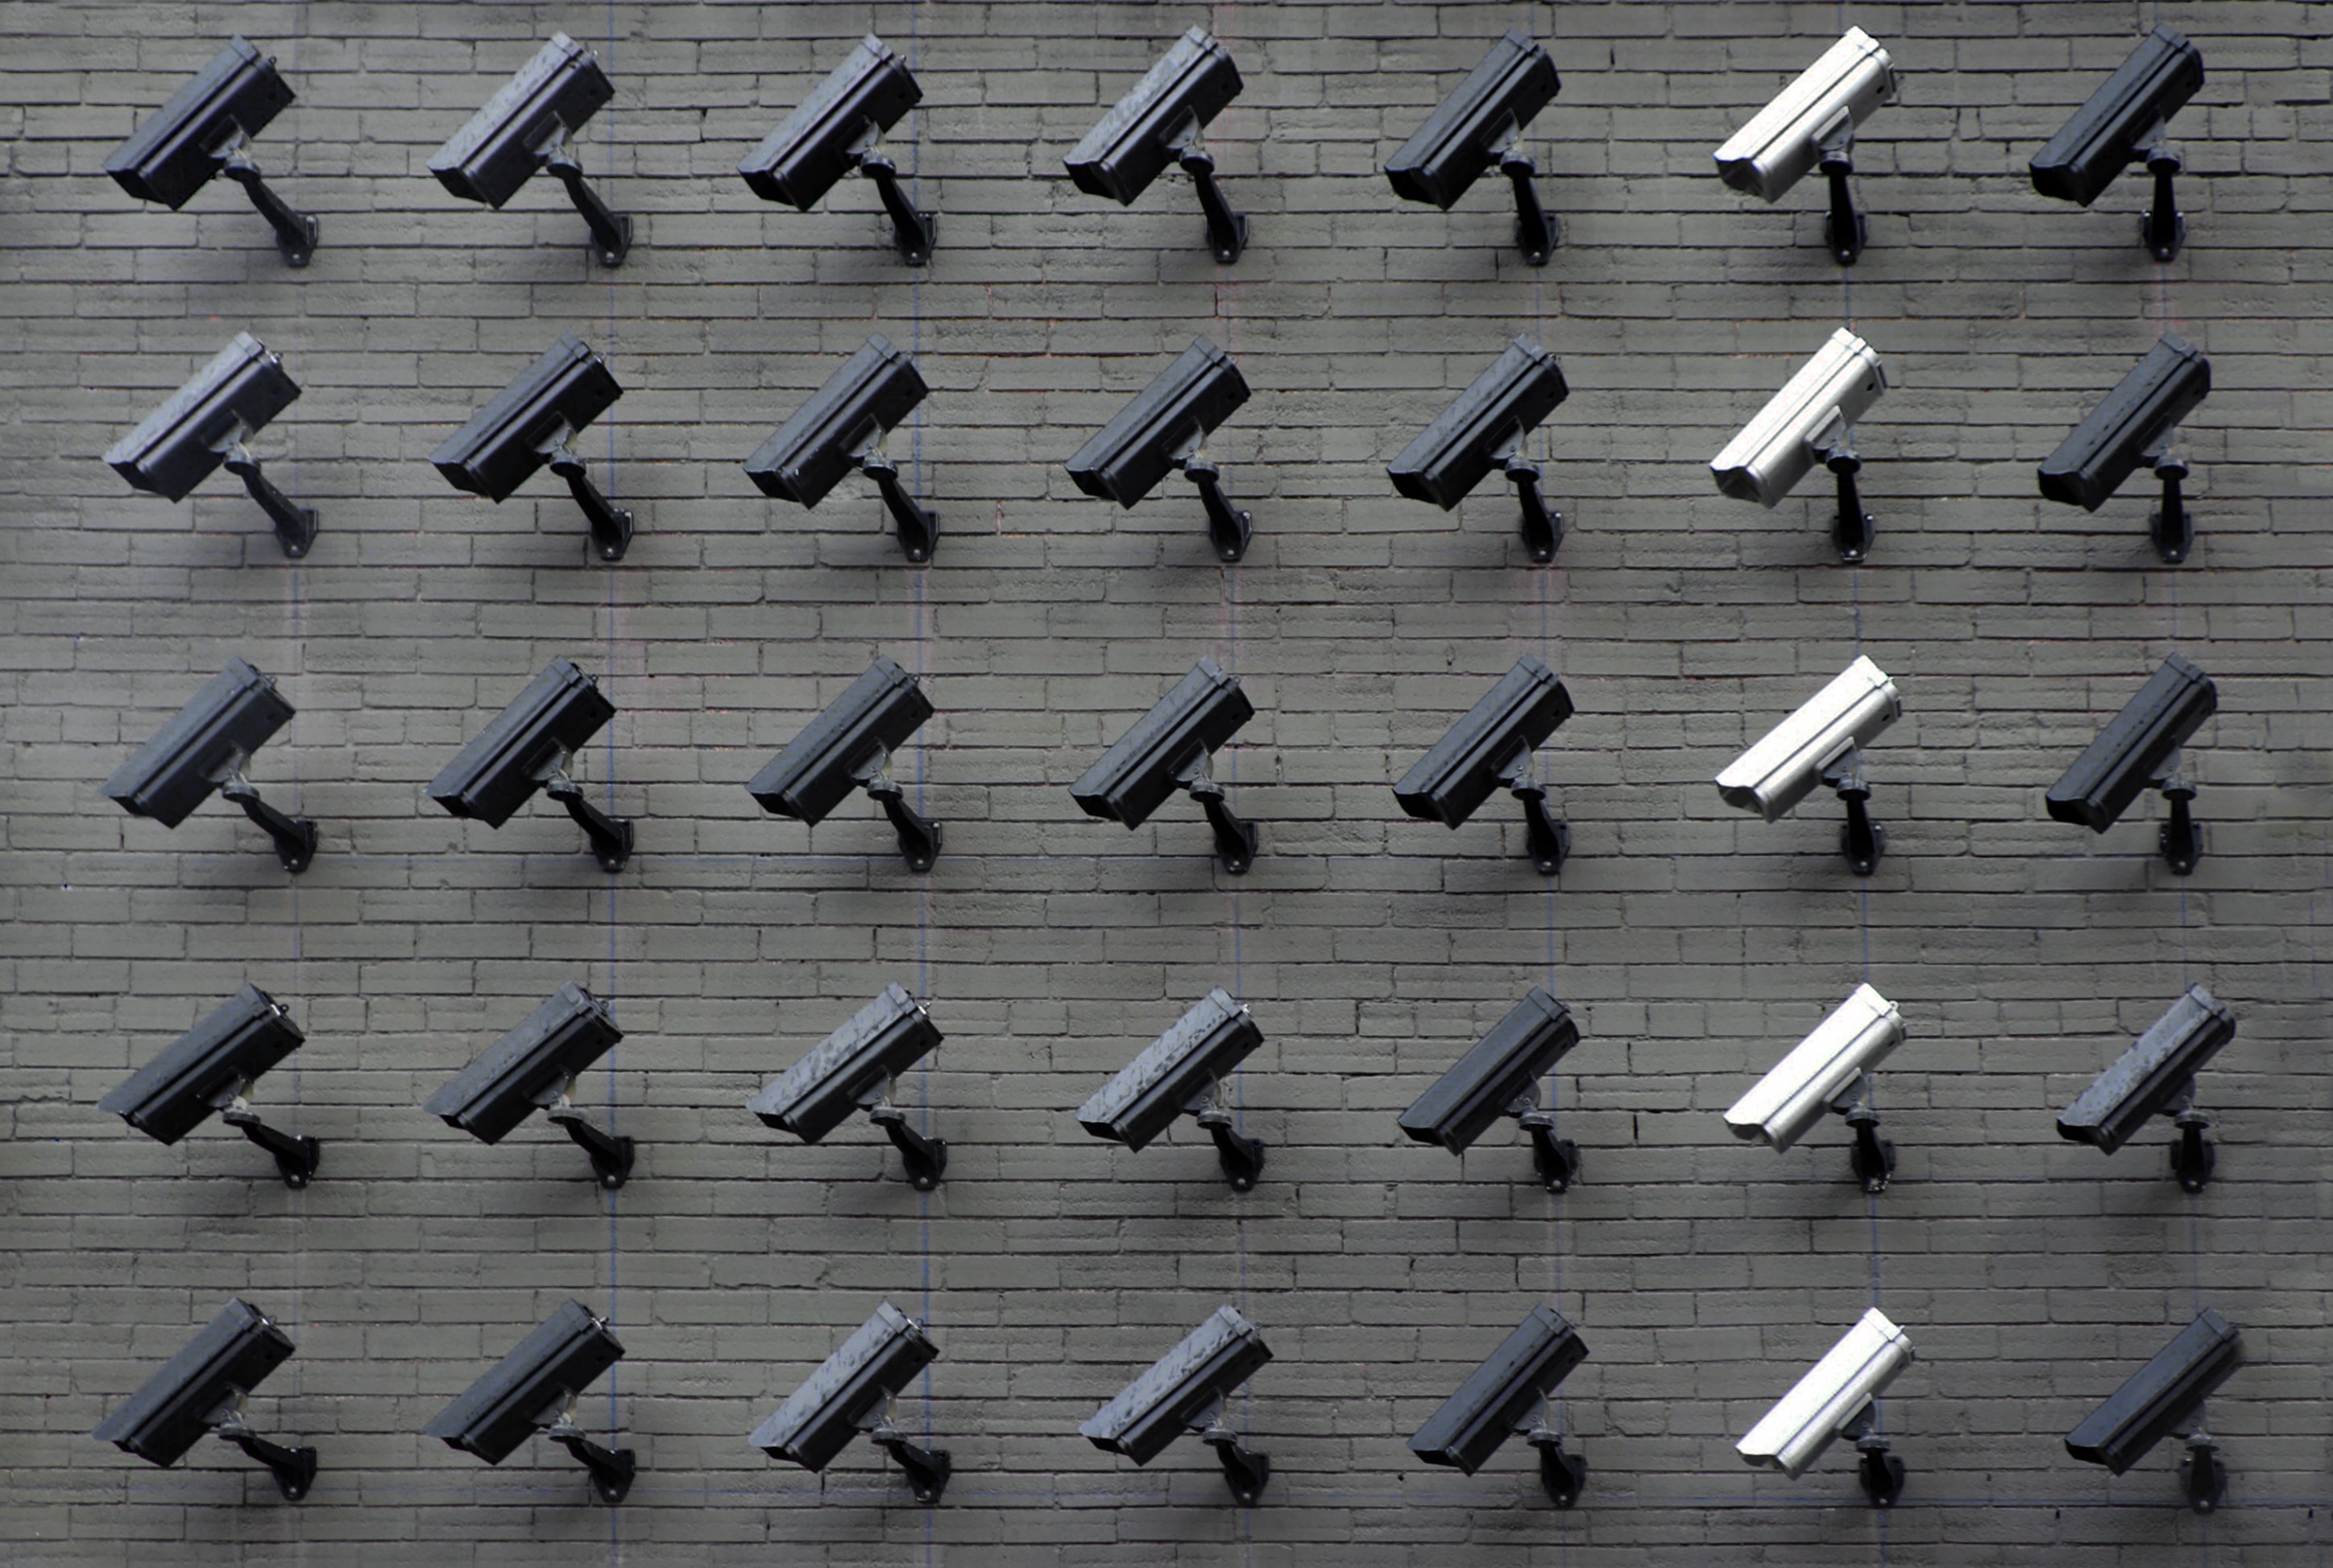 Many security cameras lined up on a wall